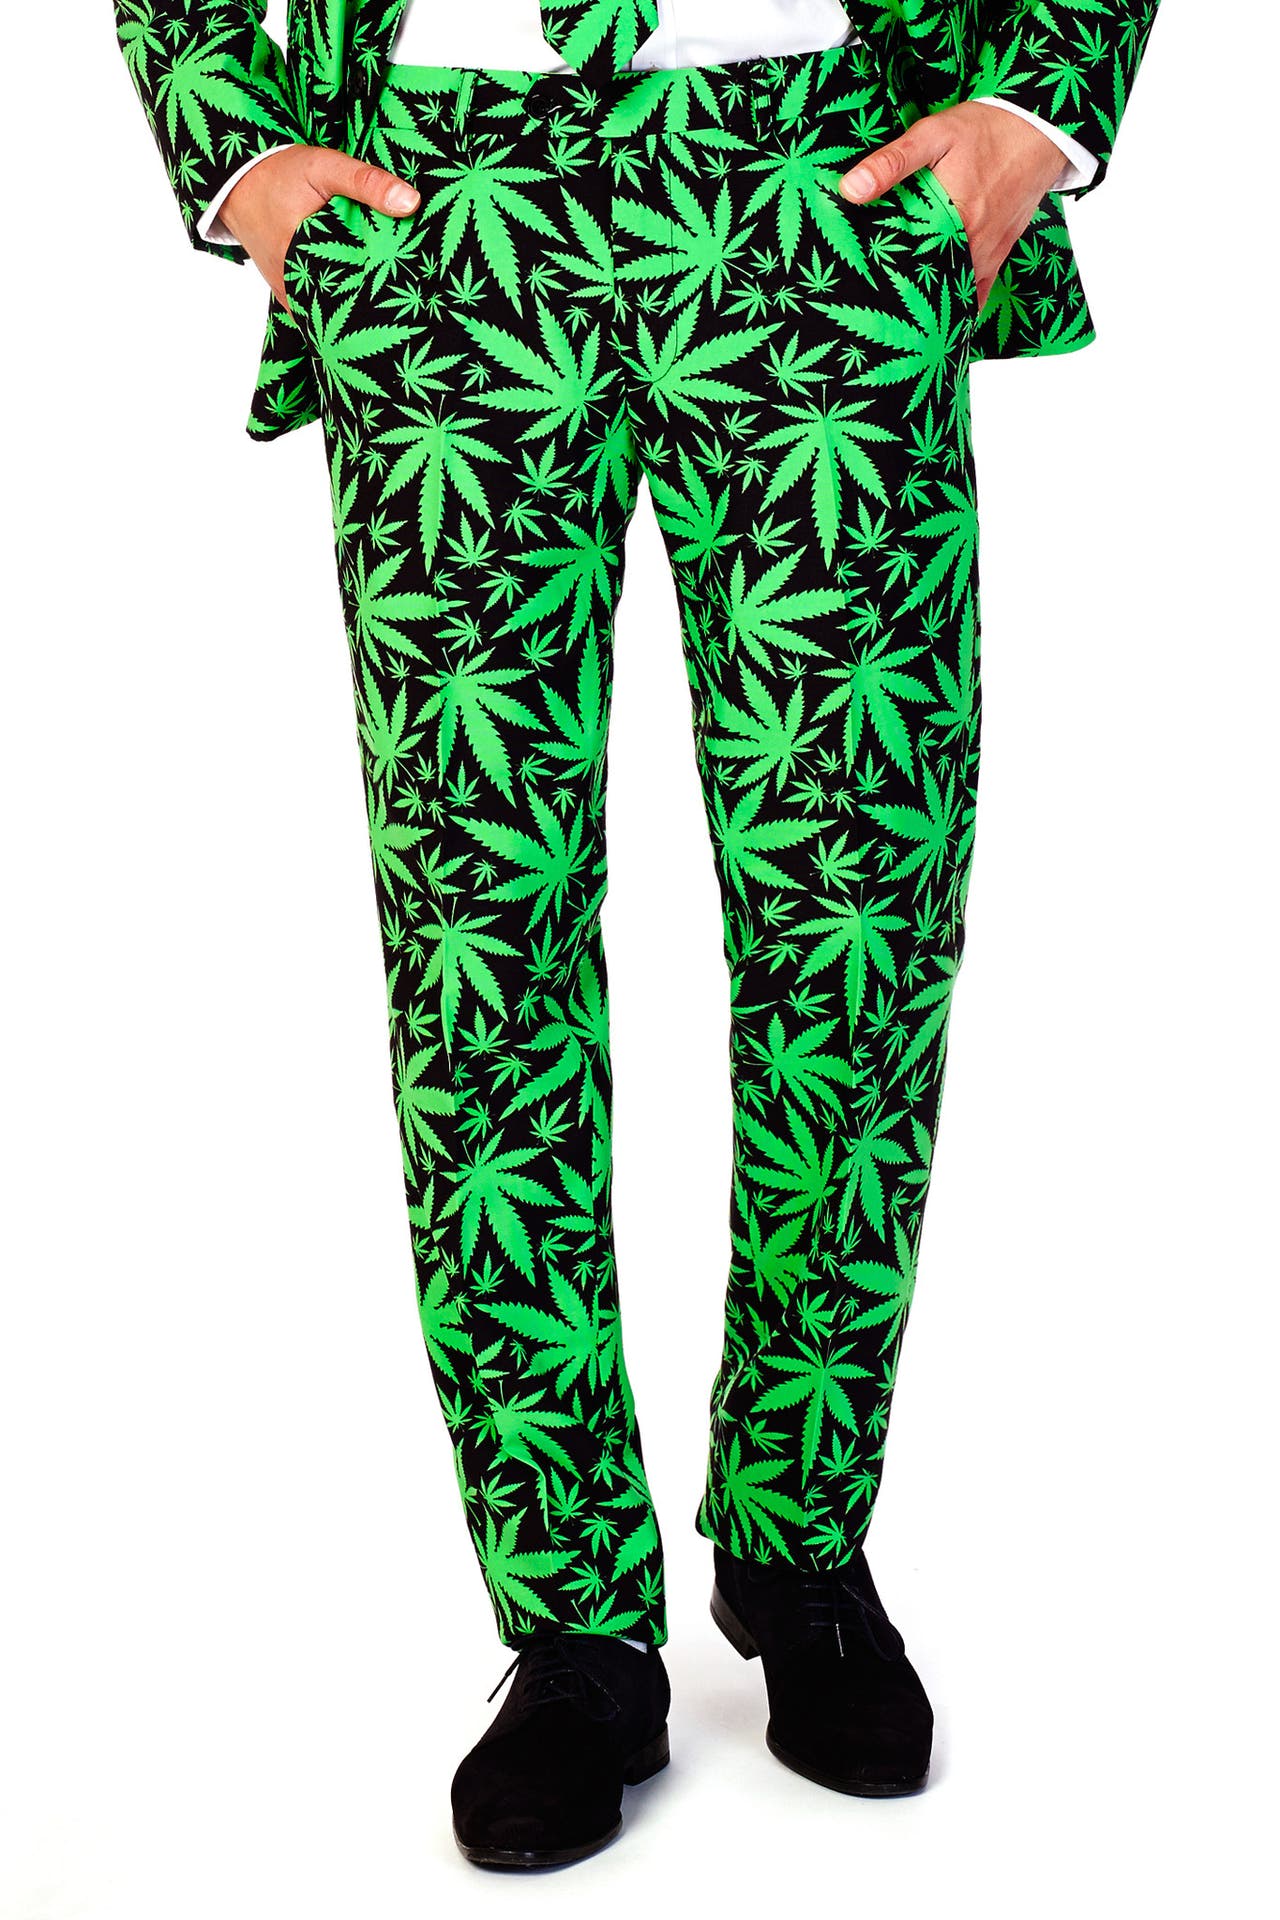 Reefer Madness Weed Leaf Pants - Shinesty